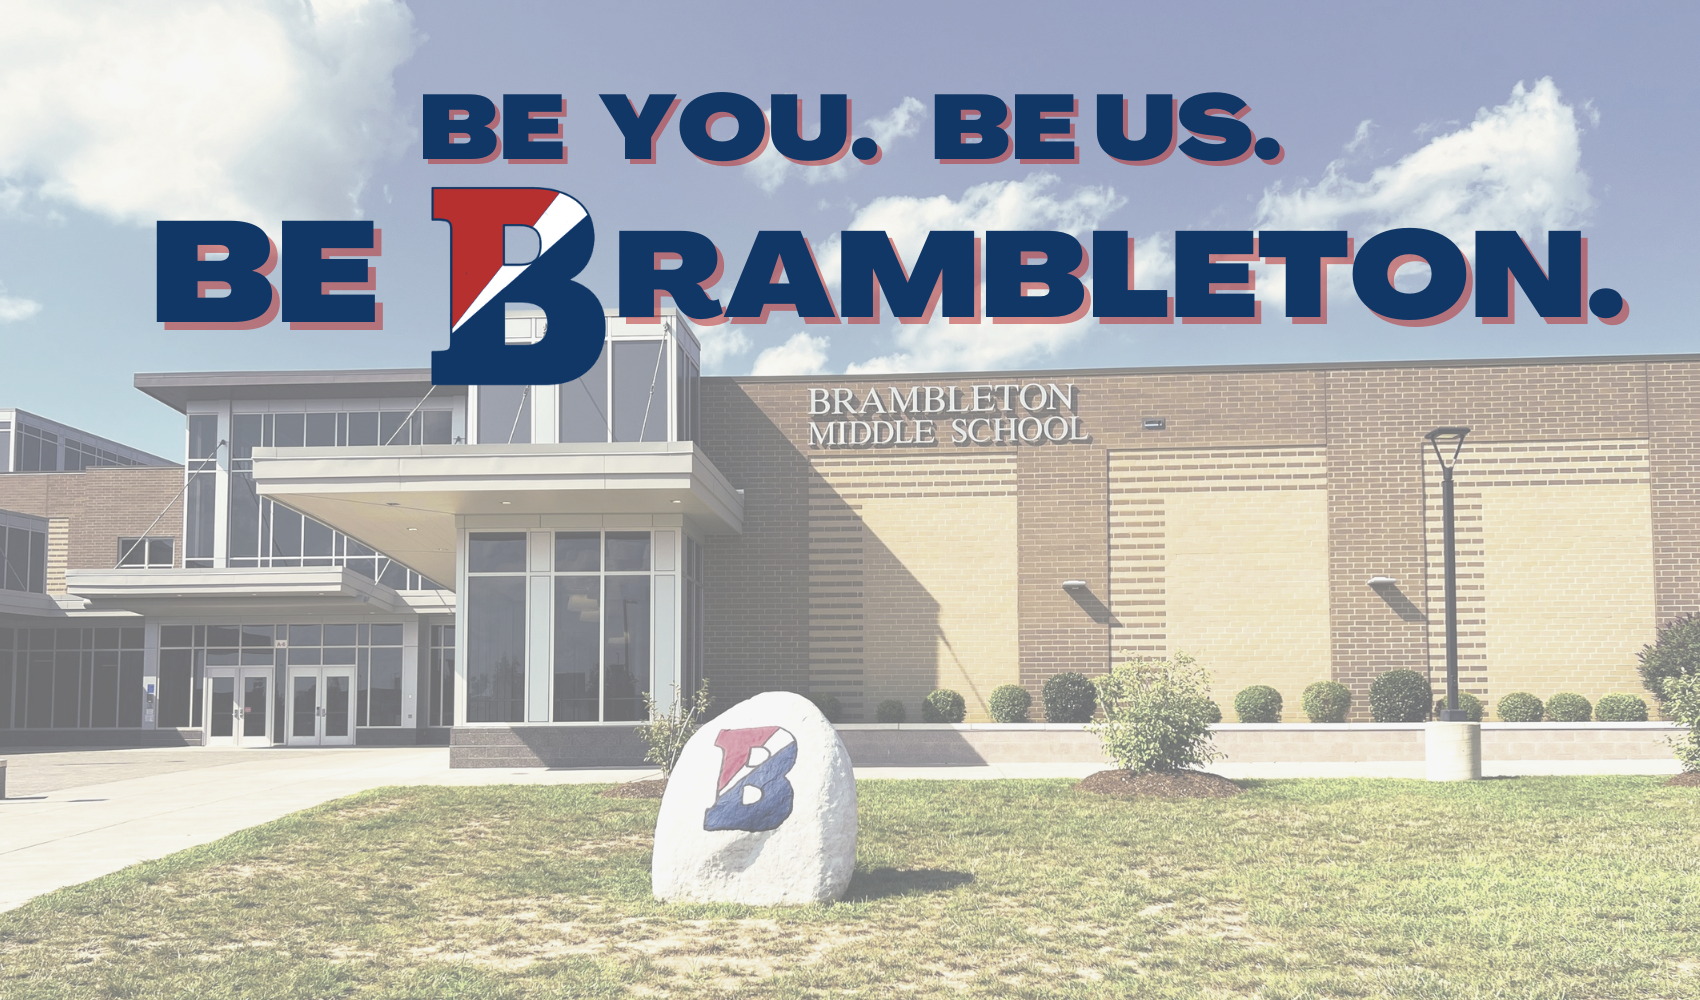 "Be you, Be us, Be Brambleton" slogan on a picture of the front entrance to the school